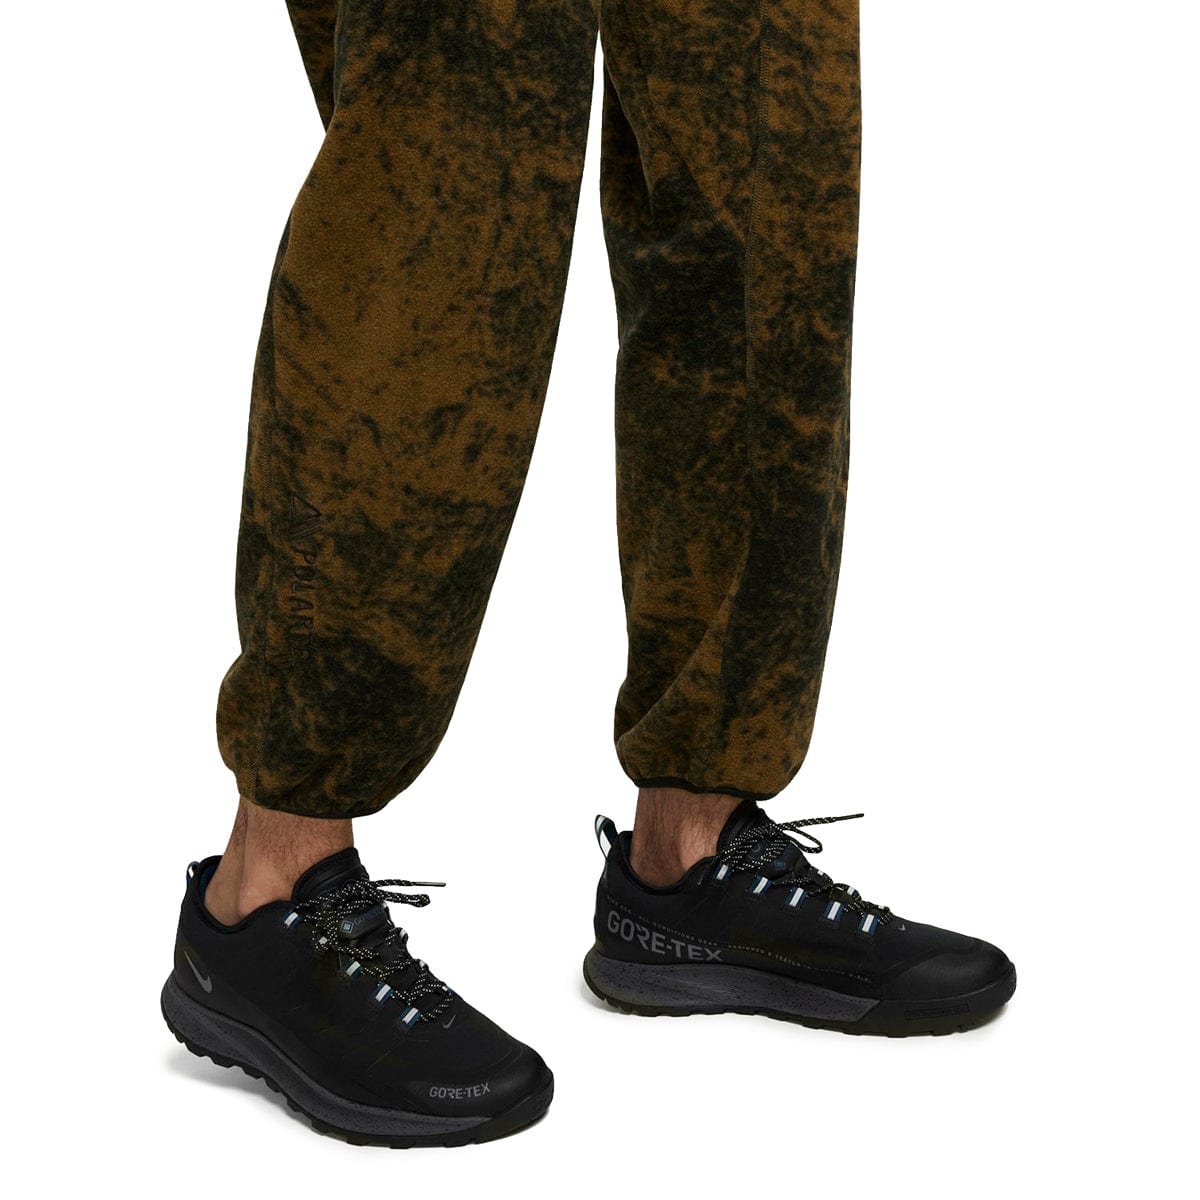 Nike Bottoms ACG THERMA-FIT "WOLF TREE"